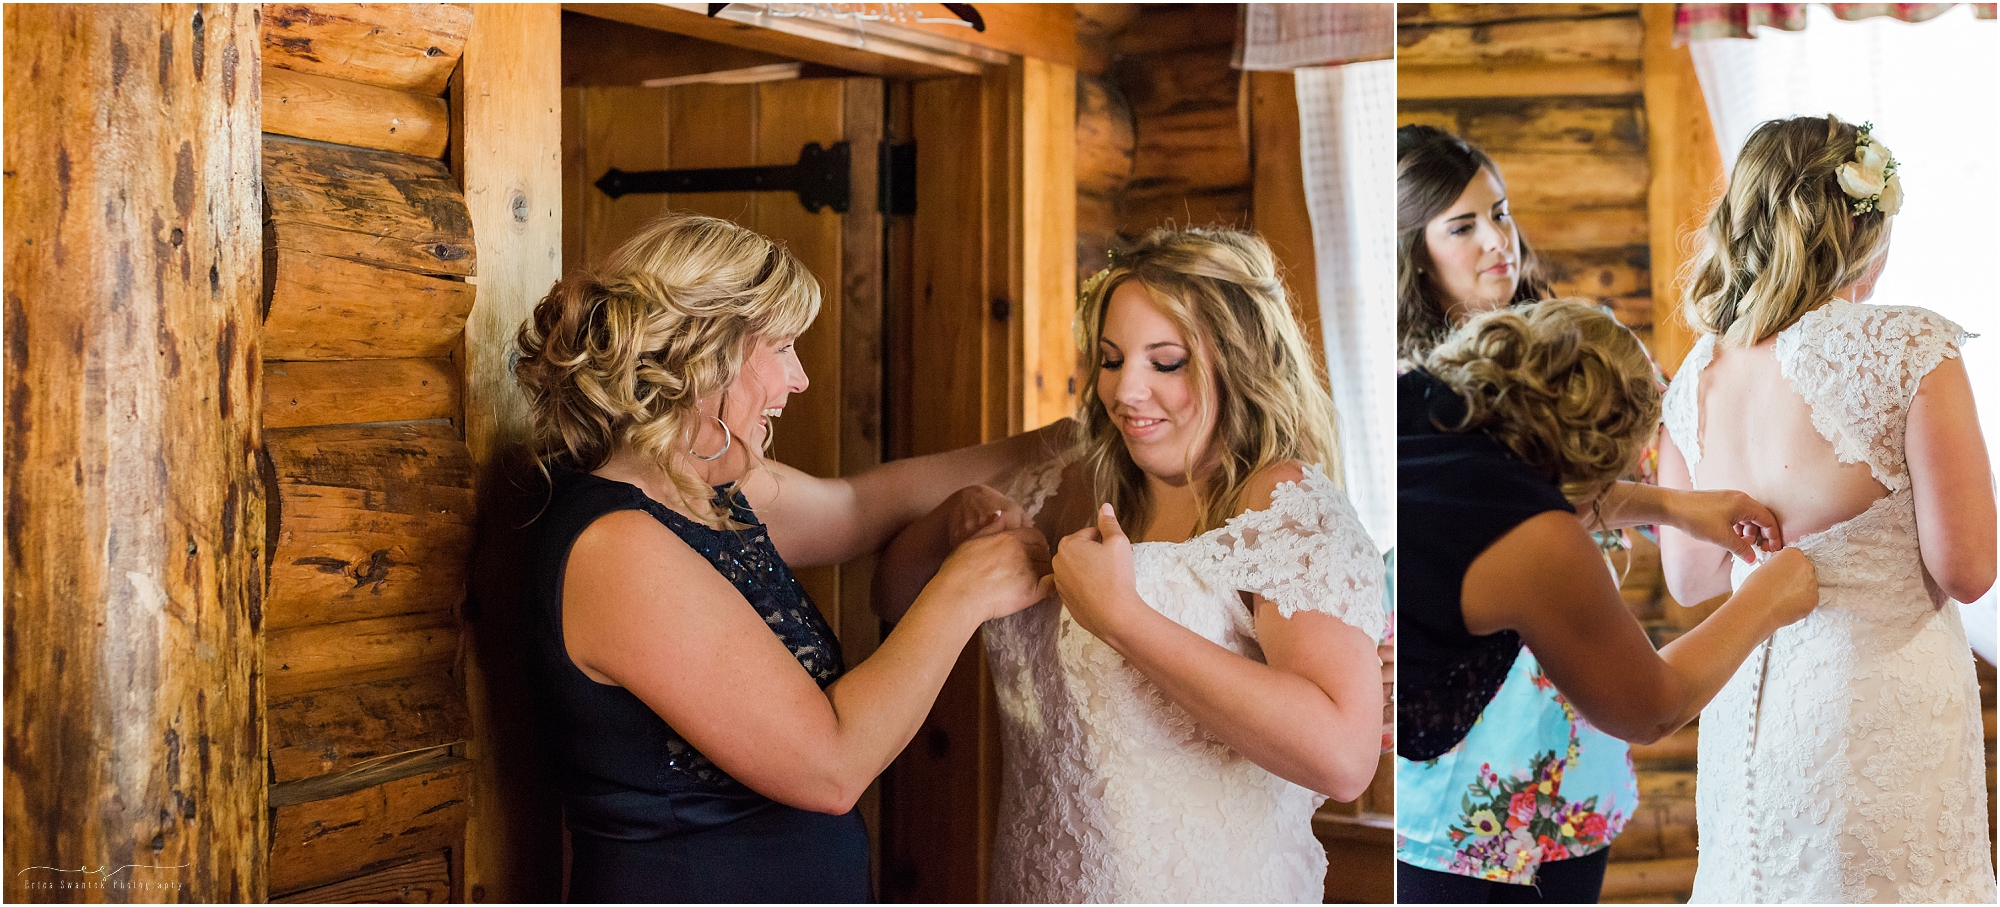 A beautiful mother of the bride moment as she helps her daughter into her wedding dress for this gorgeous lodge wedding in Oregon. 